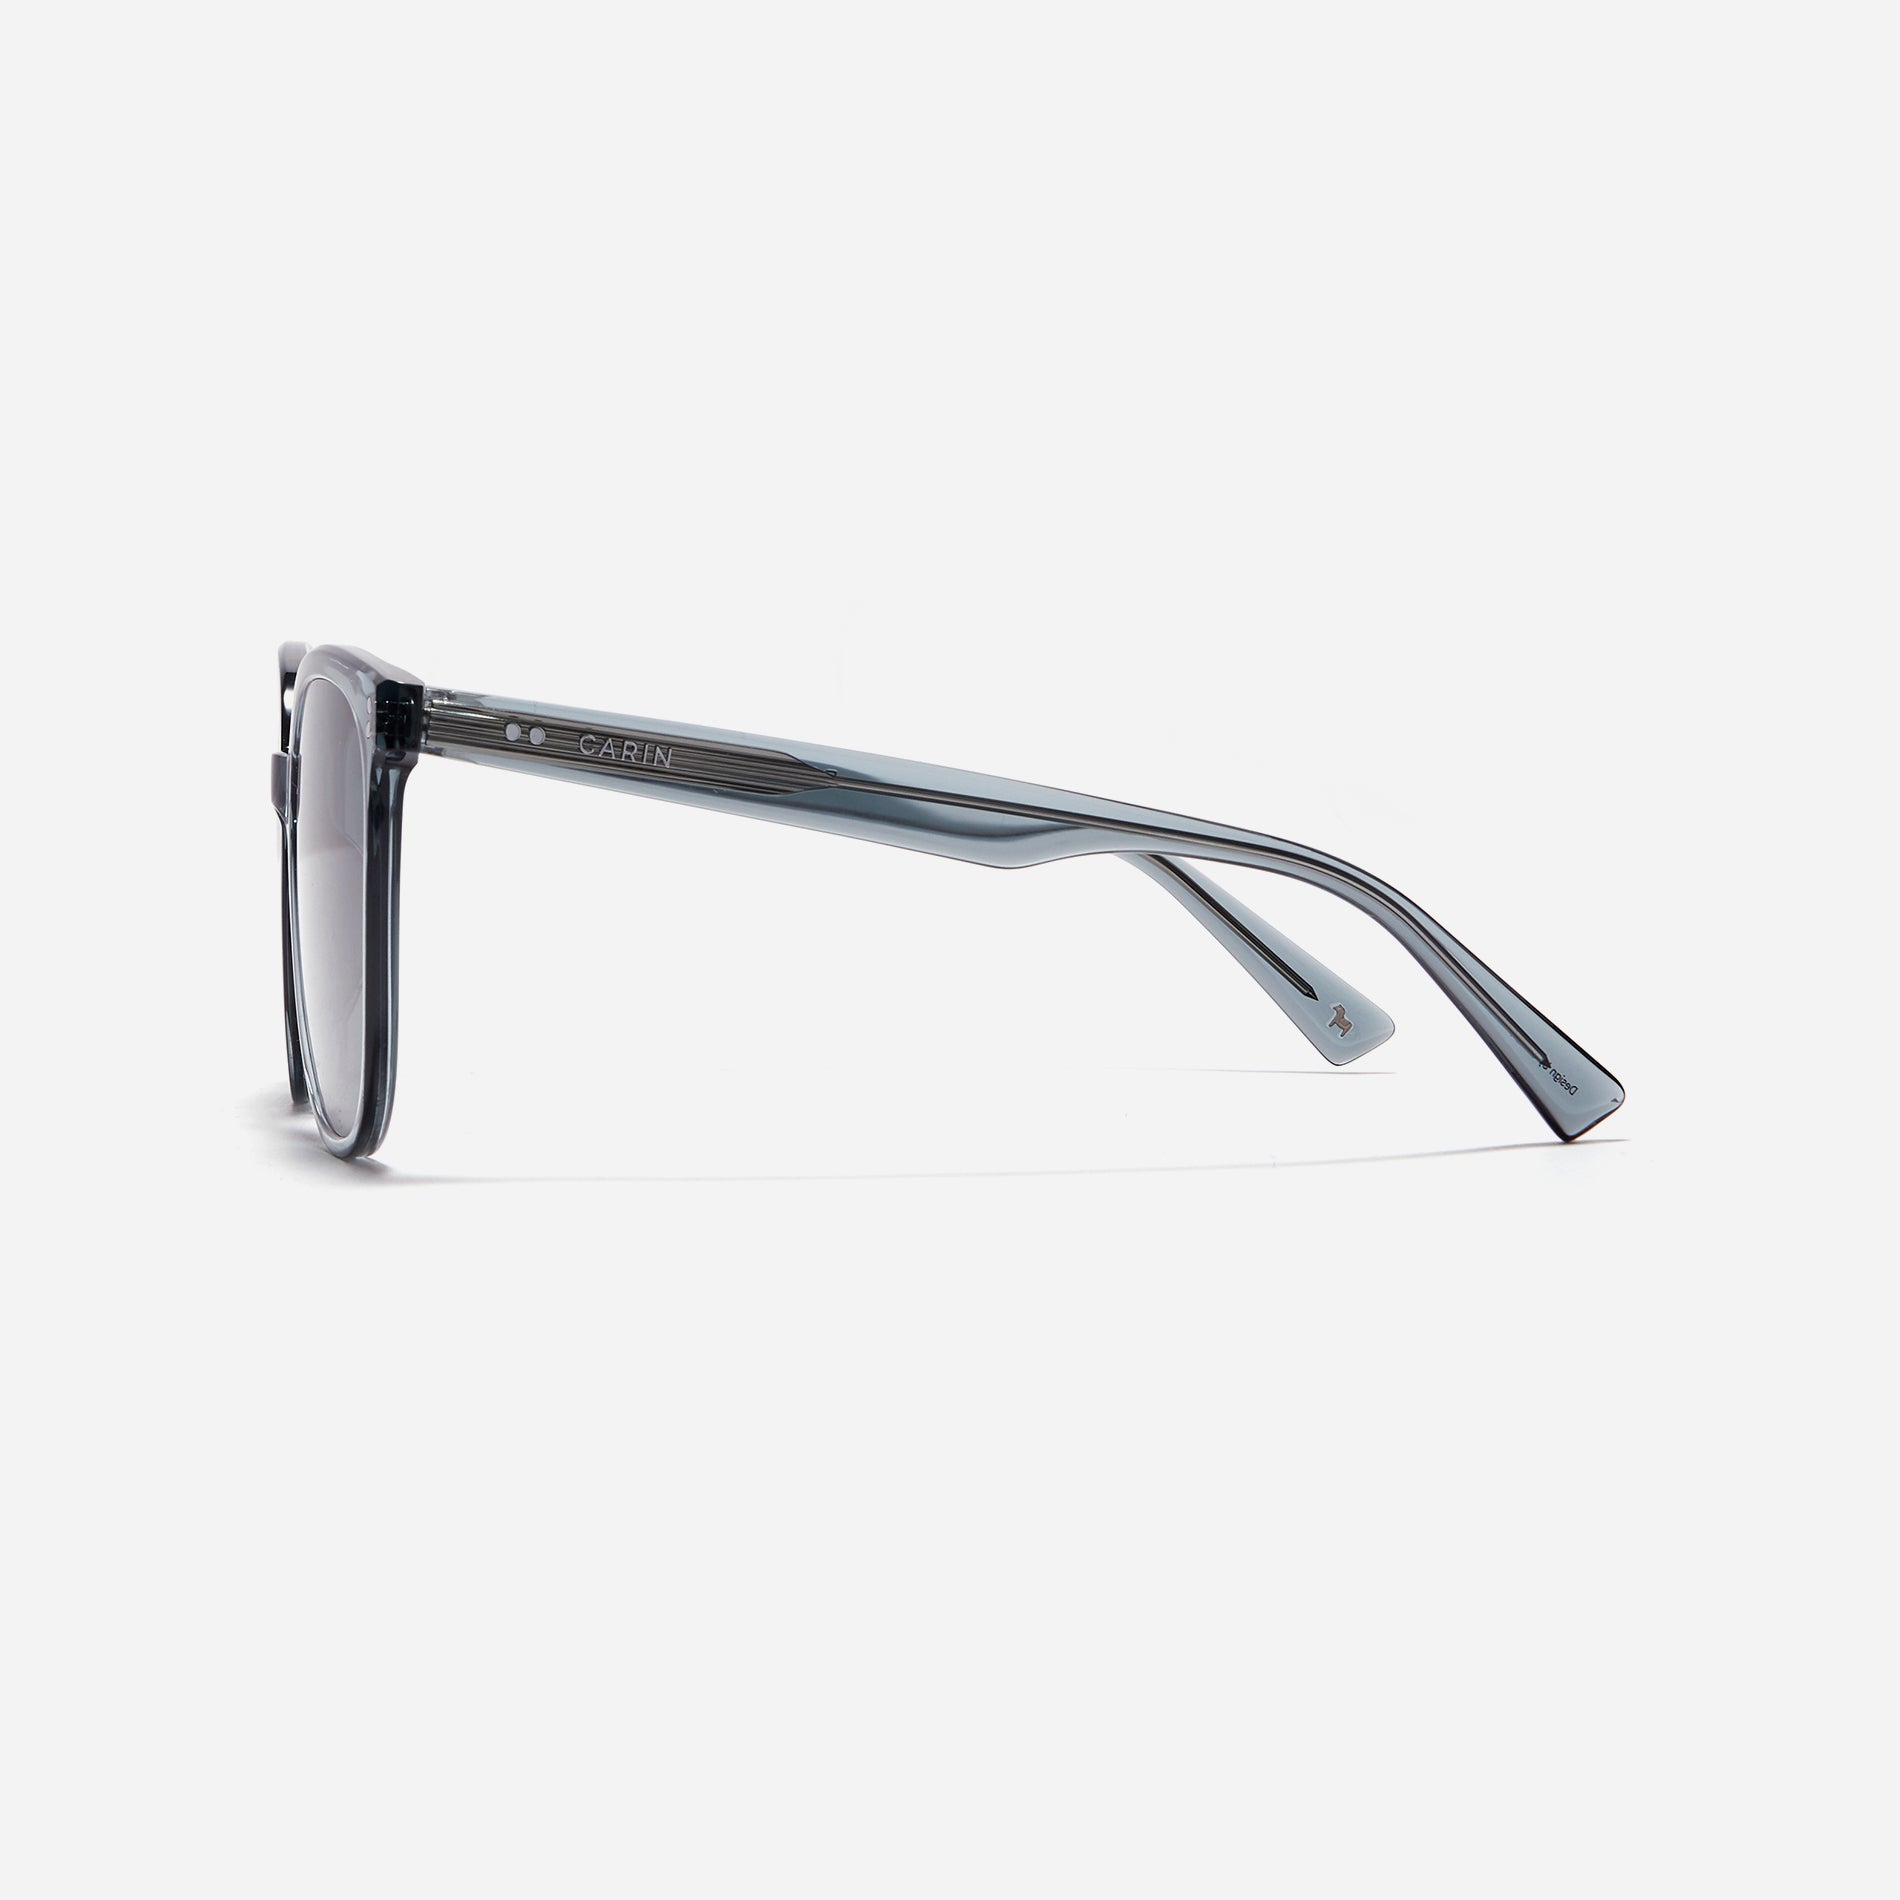 Square-shaped polarized sunglasses, crafted from compressed acetate material for enhanced lightweight properties.